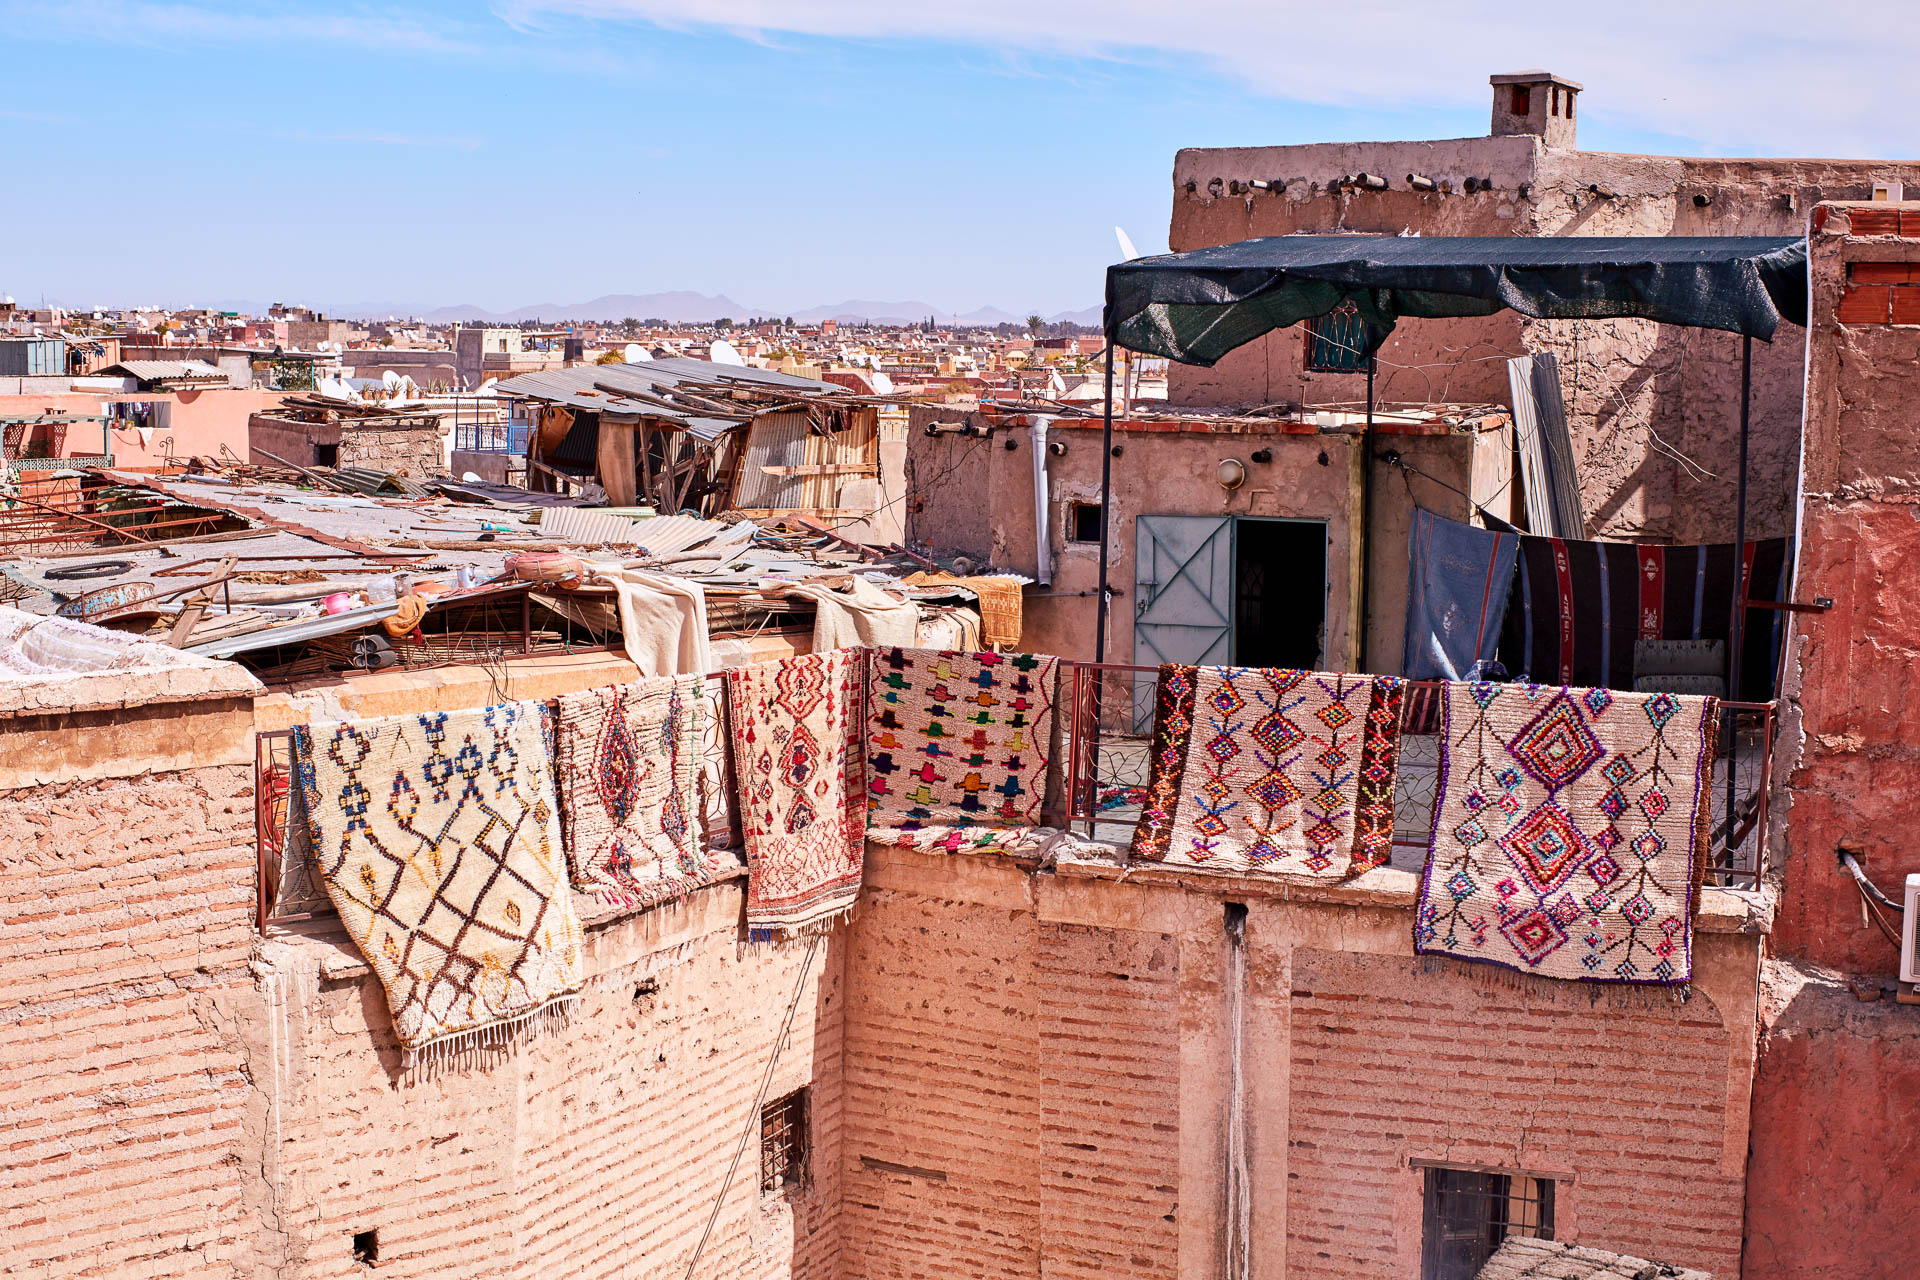 Carpets hanging from a roof in the Medina Marrakech